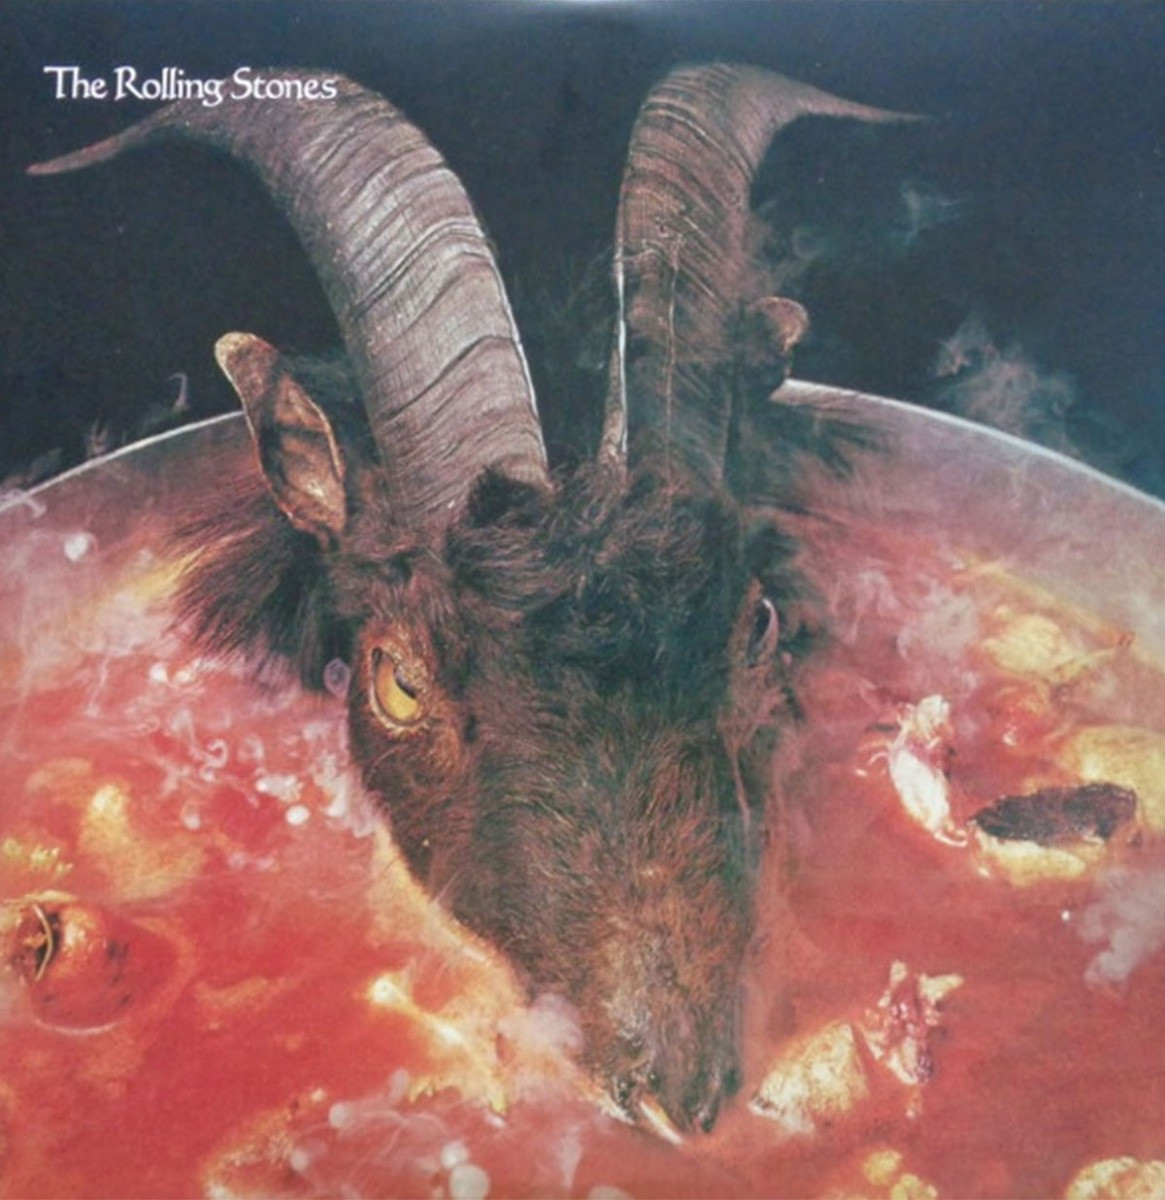 The Rolling Stones - Goats Head Soup (Half Speed Mastered) (Transparant Vinyl) 2LP